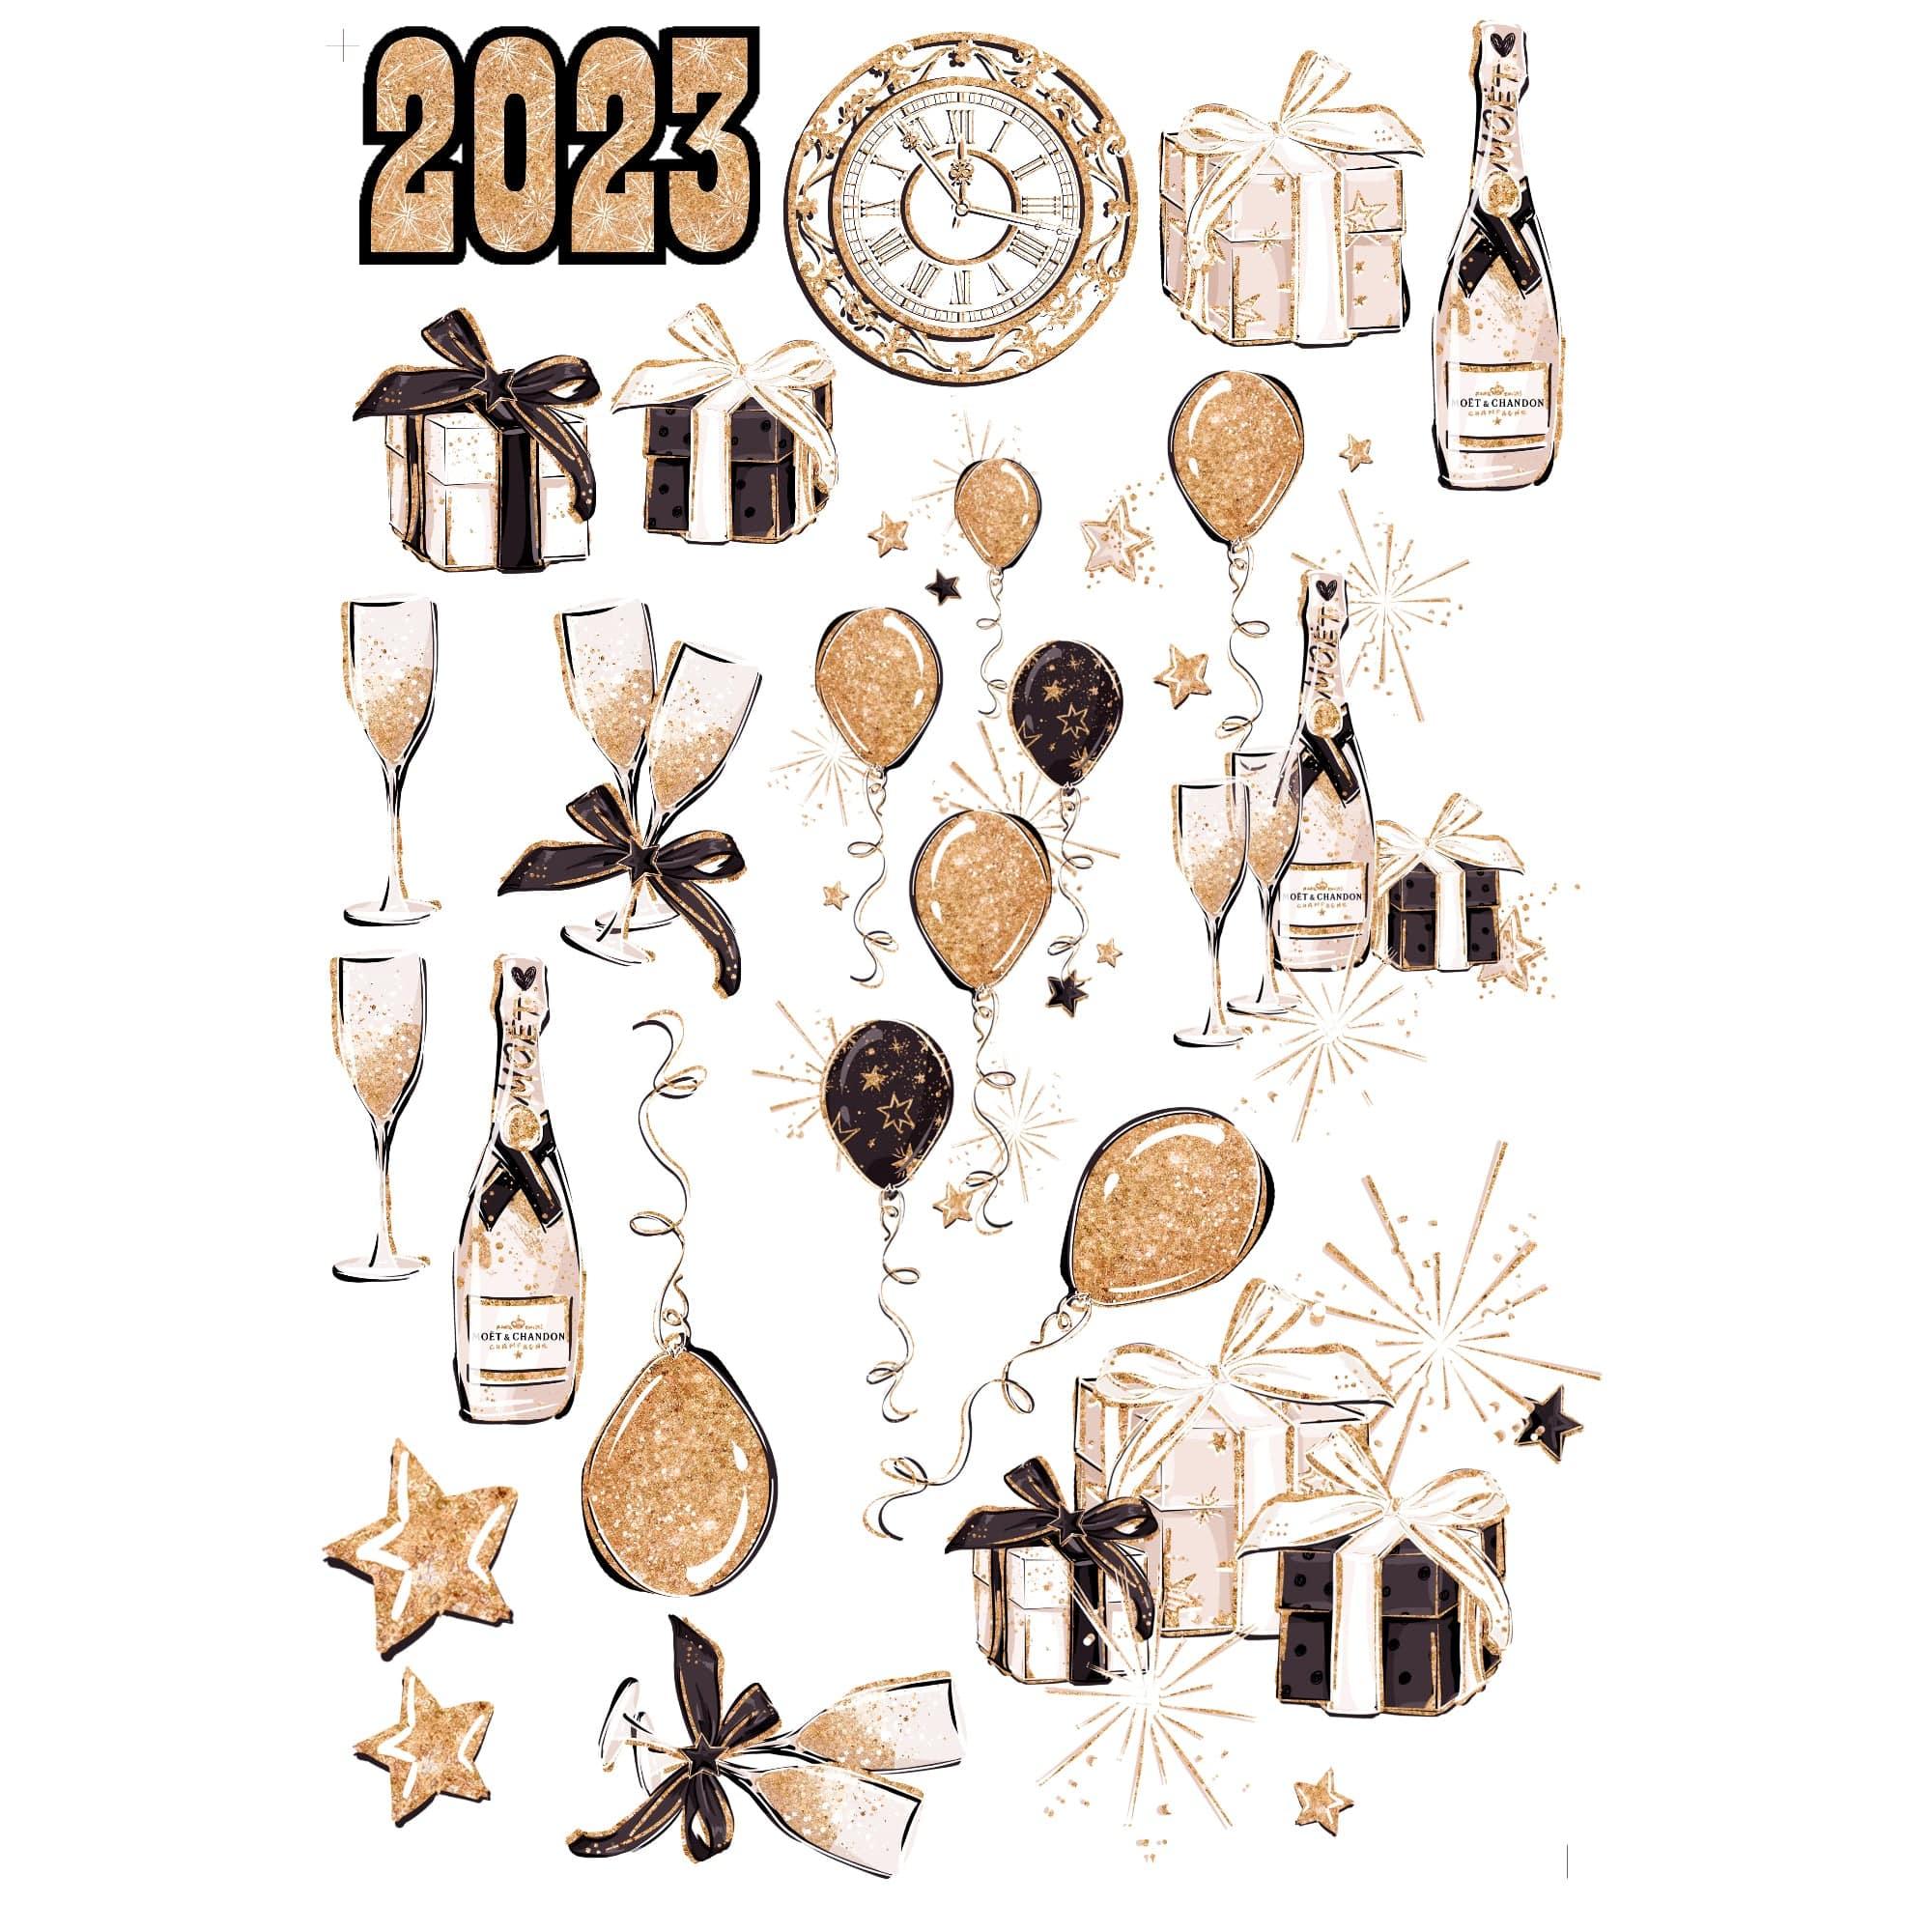 New Year's Eve 2023 Celebration Collection 12 x 12 Scrapbook Paper & Embellishment Kit by SSC Designs - Scrapbook Supply Companies